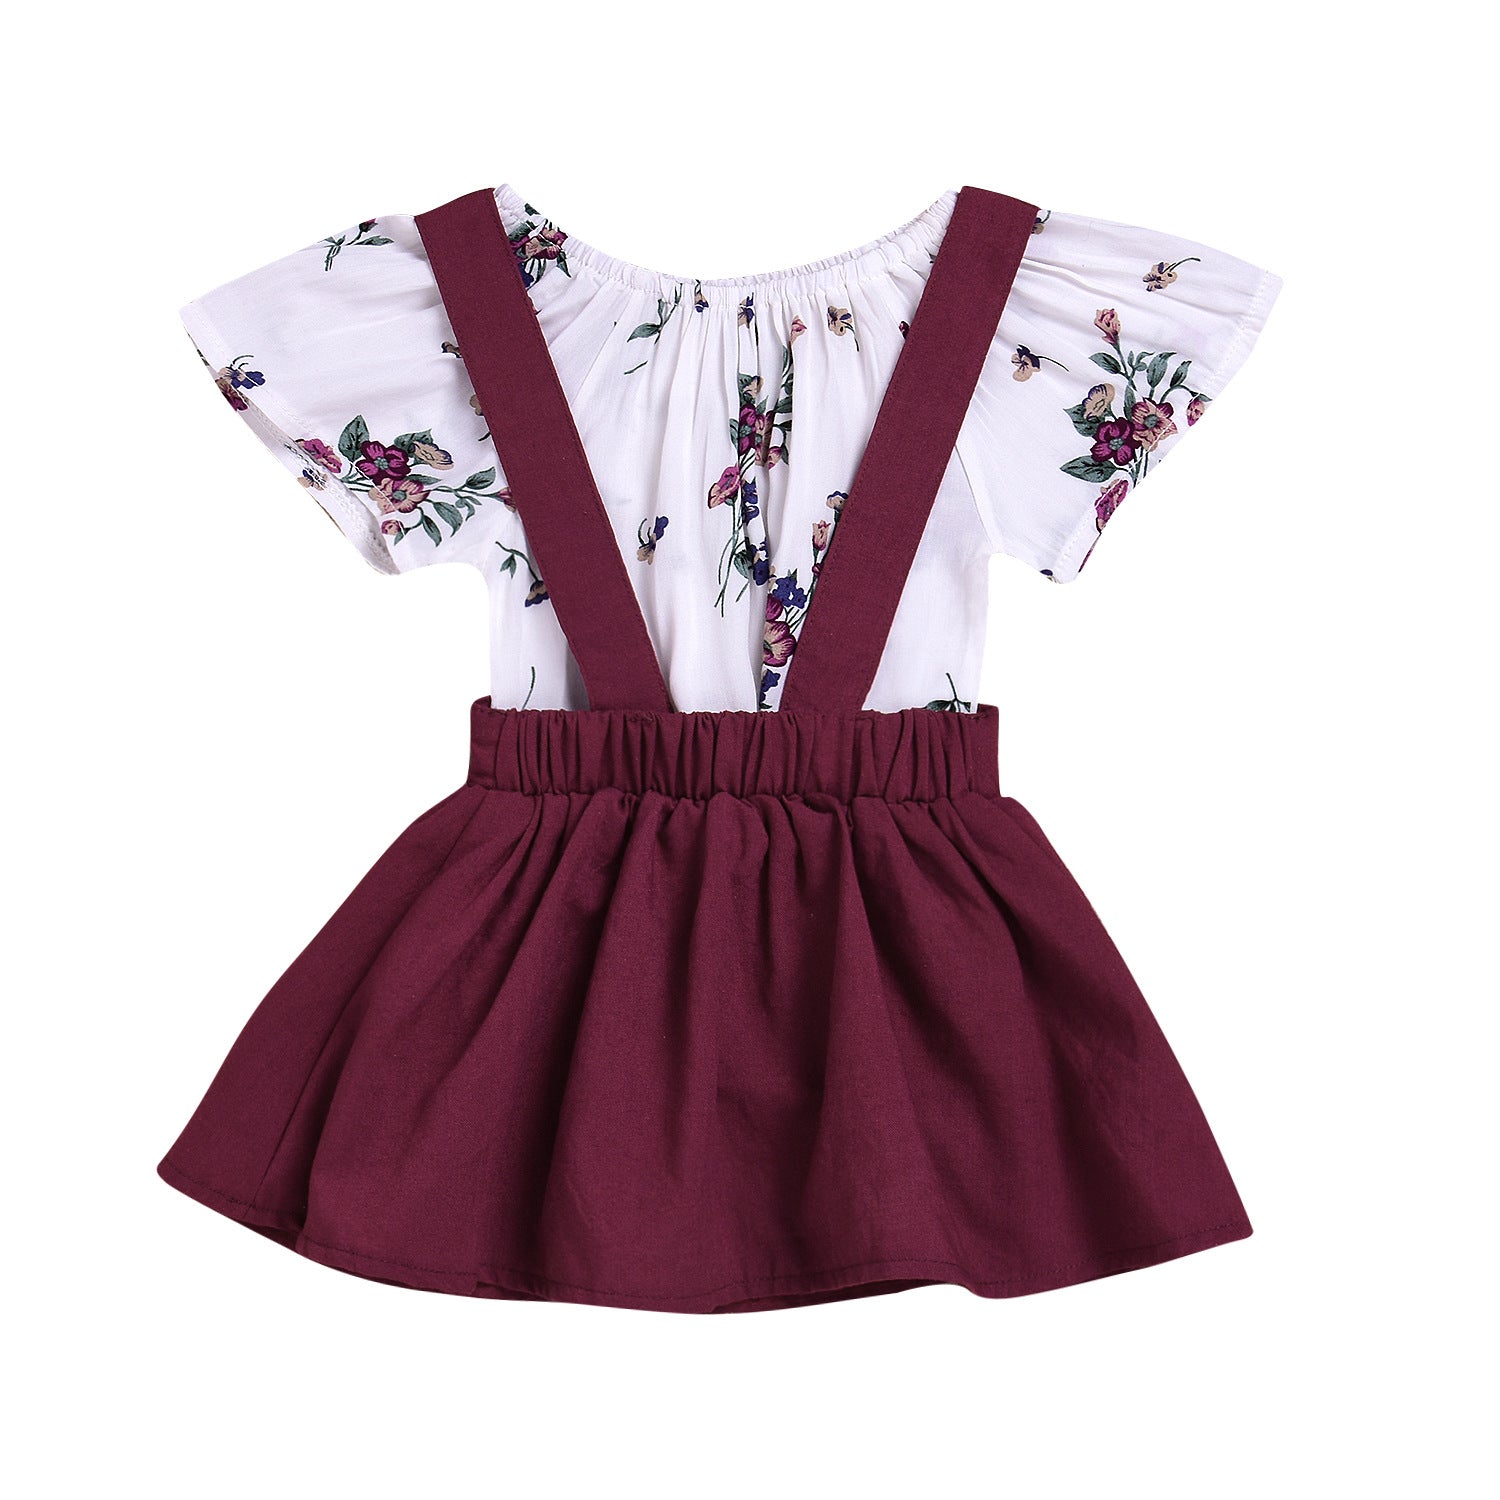 Patricia Floral Set Toddler Kids Baby Girls Floral Romper Suspender Skirt Overalls 2PCS Outfits Baby Clothing - TryKid